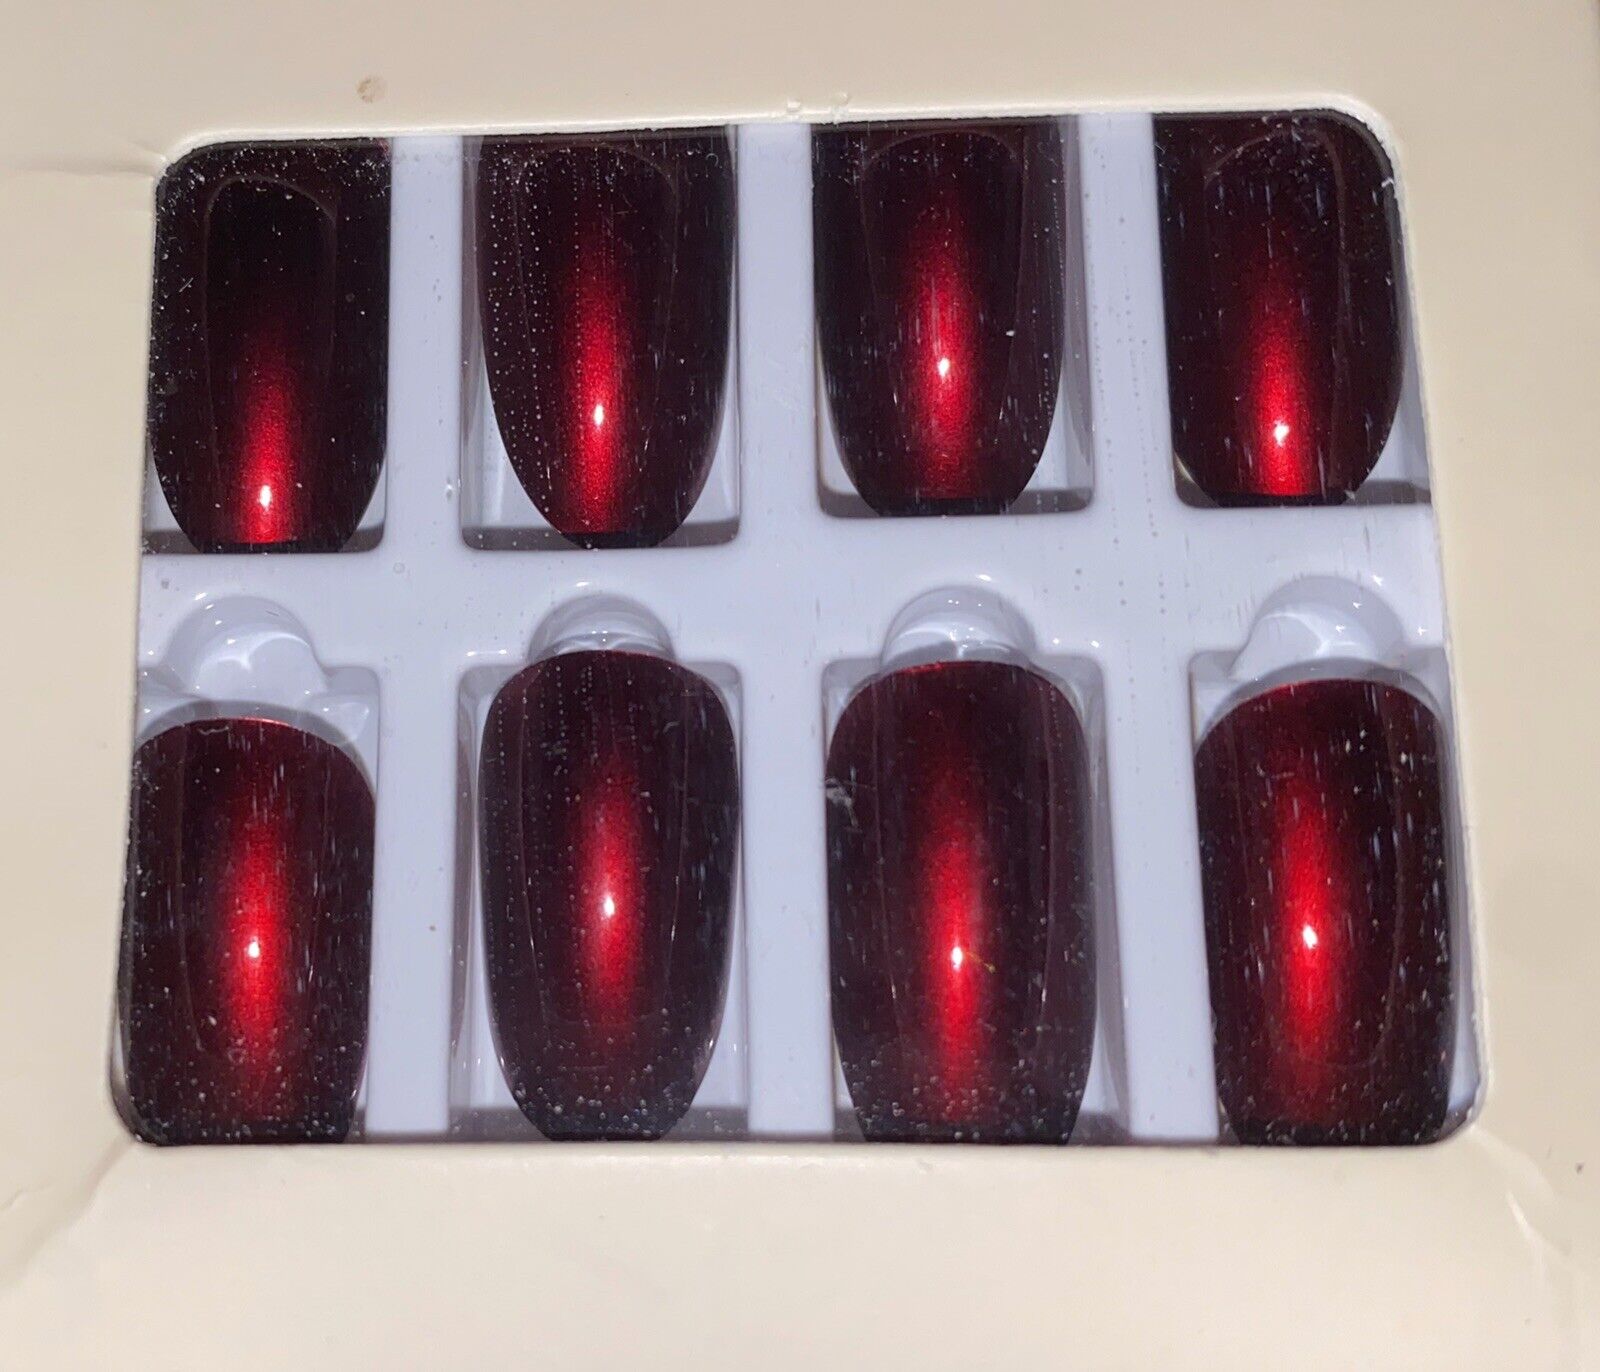 Gorgeous Shiny Deep Red Full Cover Nails of Gl Cheap mail order specialty store Free Shipping New 5 Boxes 120 24